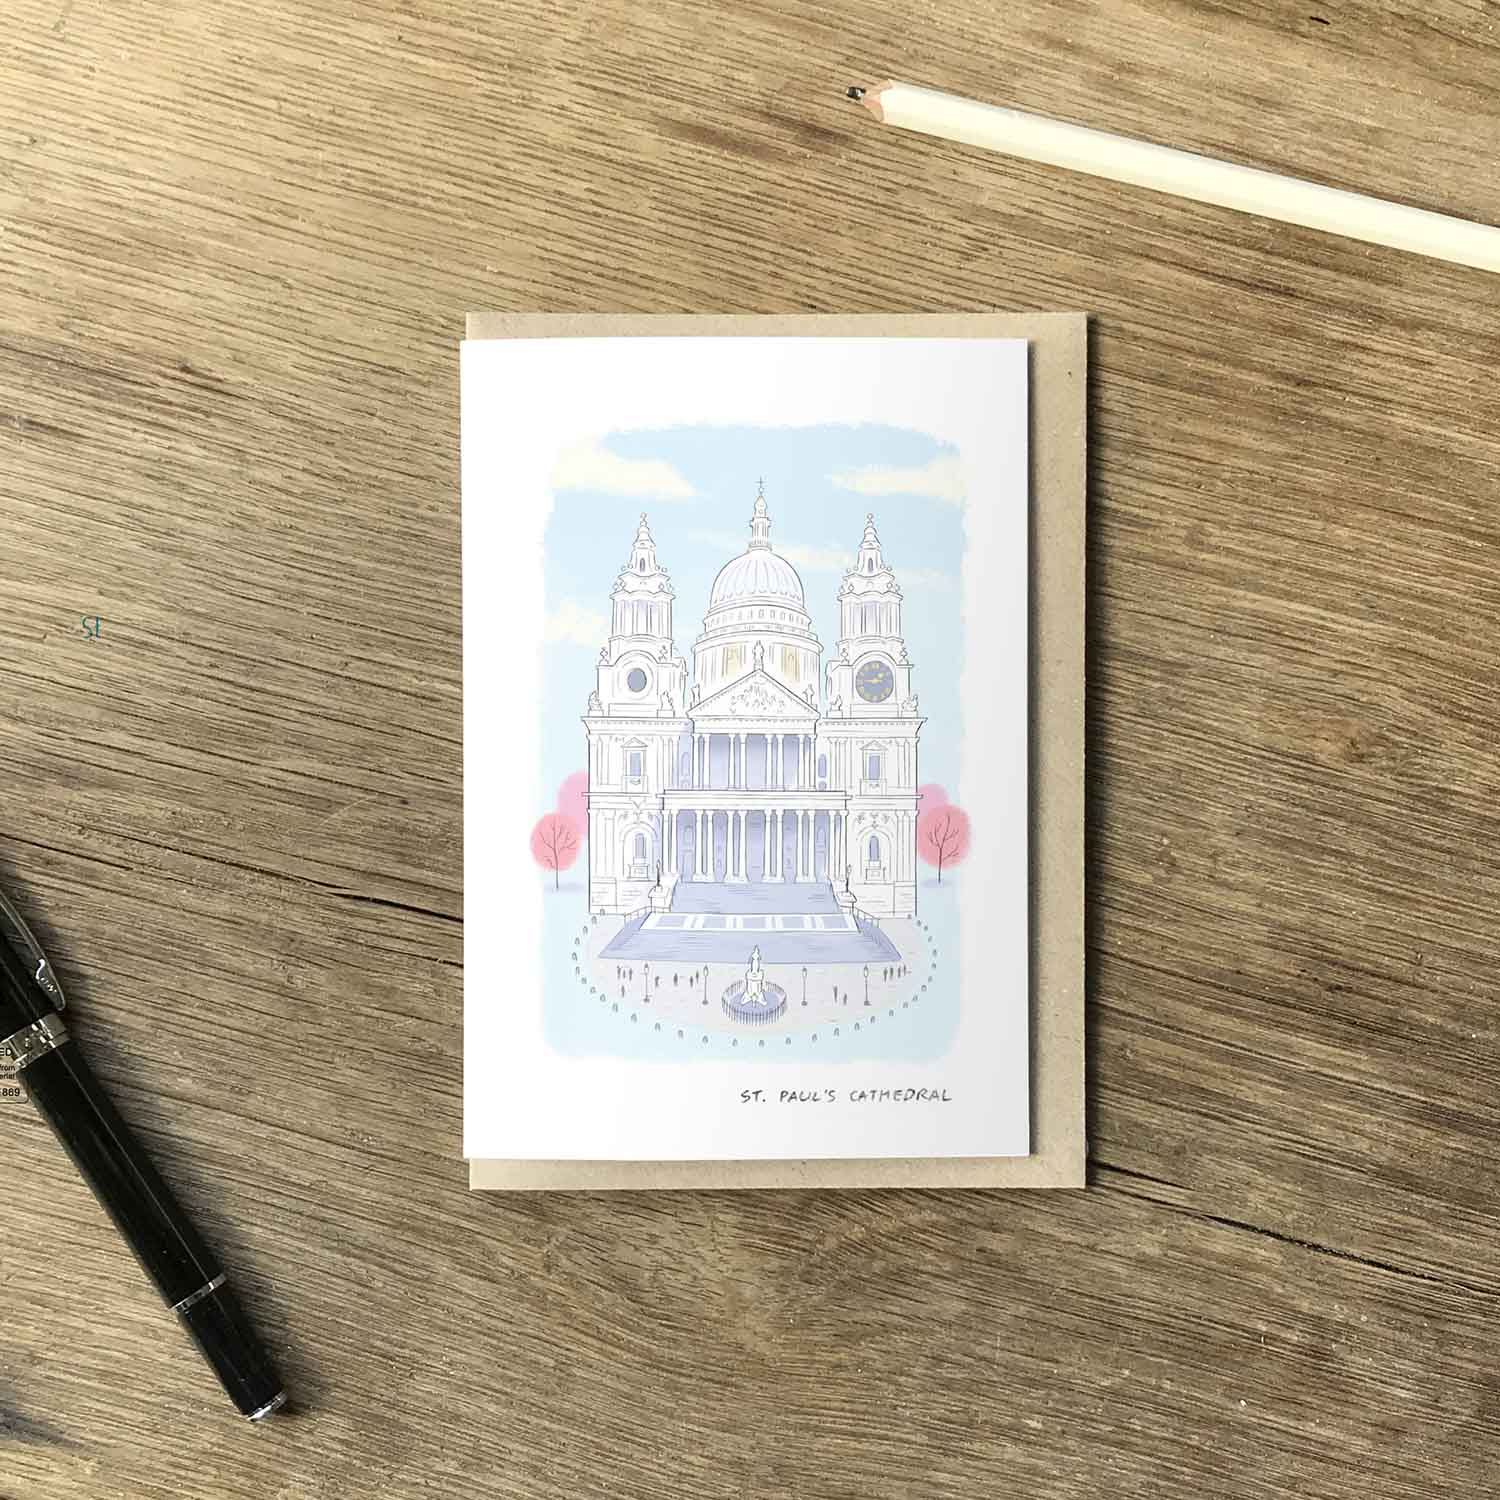 London's St Paul's Cathedral beautifully illustrated on a greeting card from mike green illustration.